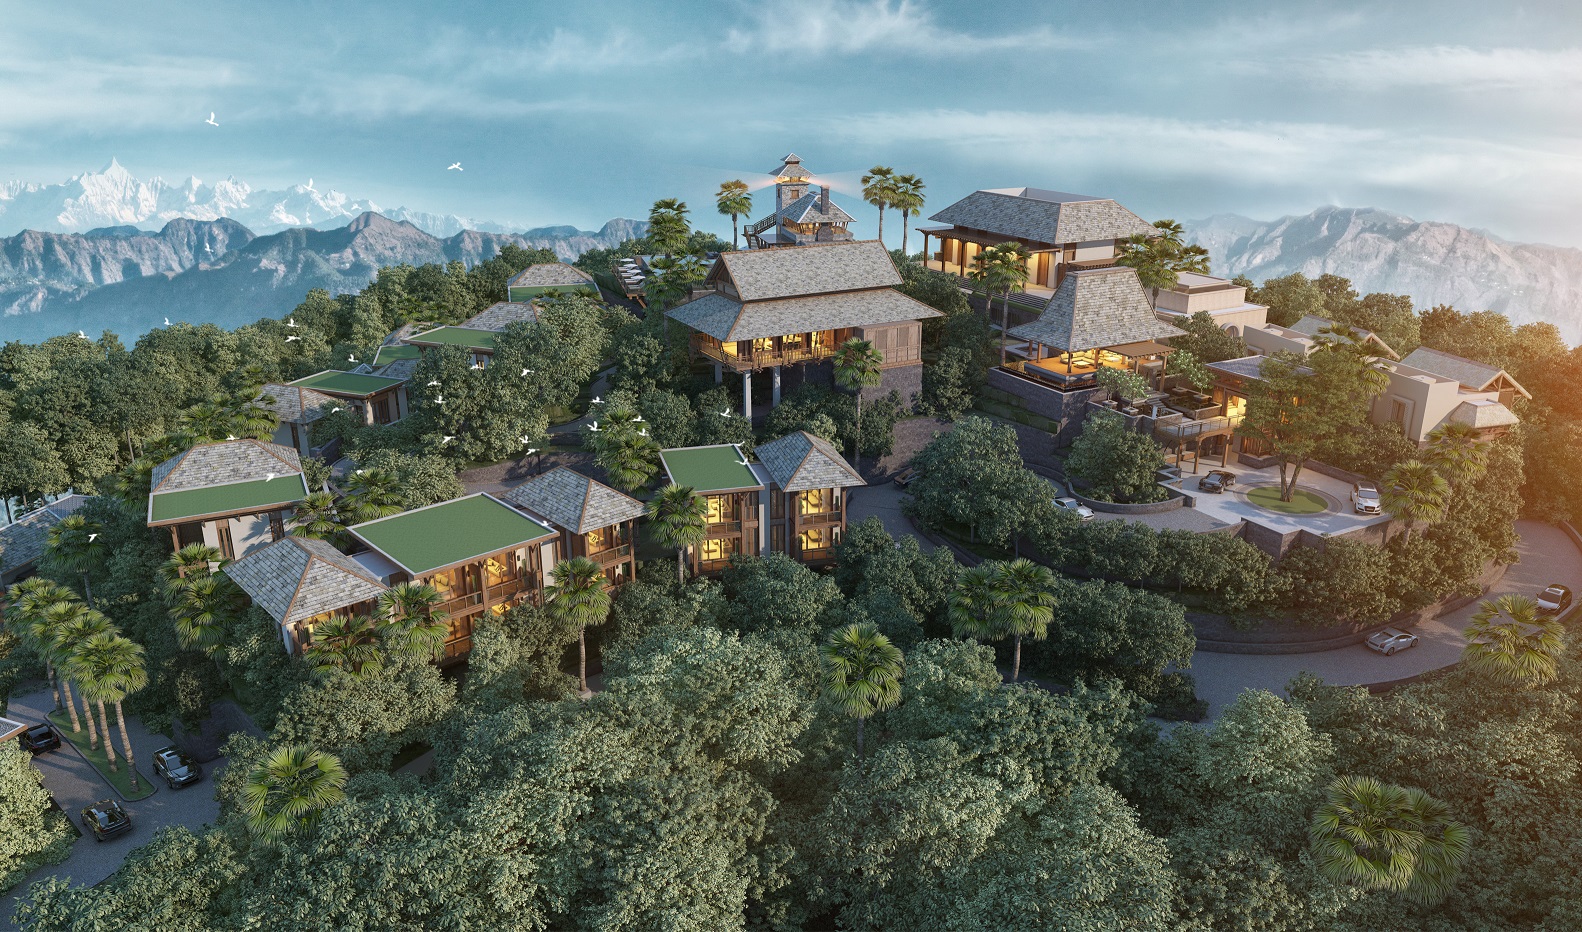 Dusit Hotels and Resorts makes its Nepal debut